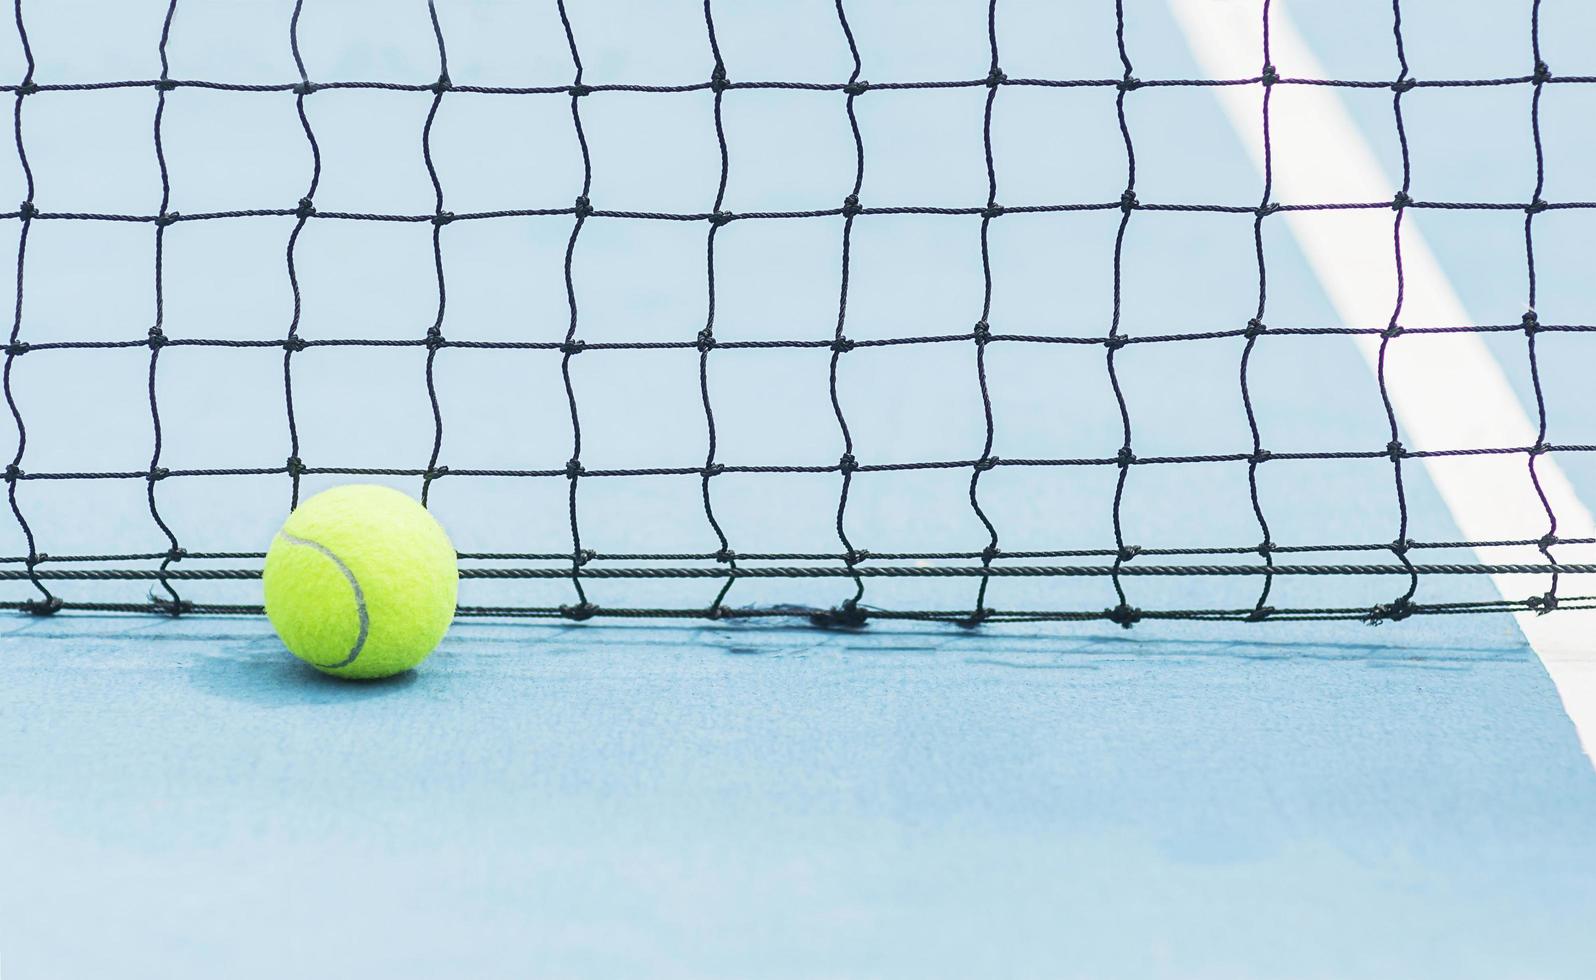 tennis ball with black screen net background on hard blue tennis court - tennis game tournament competition concept photo